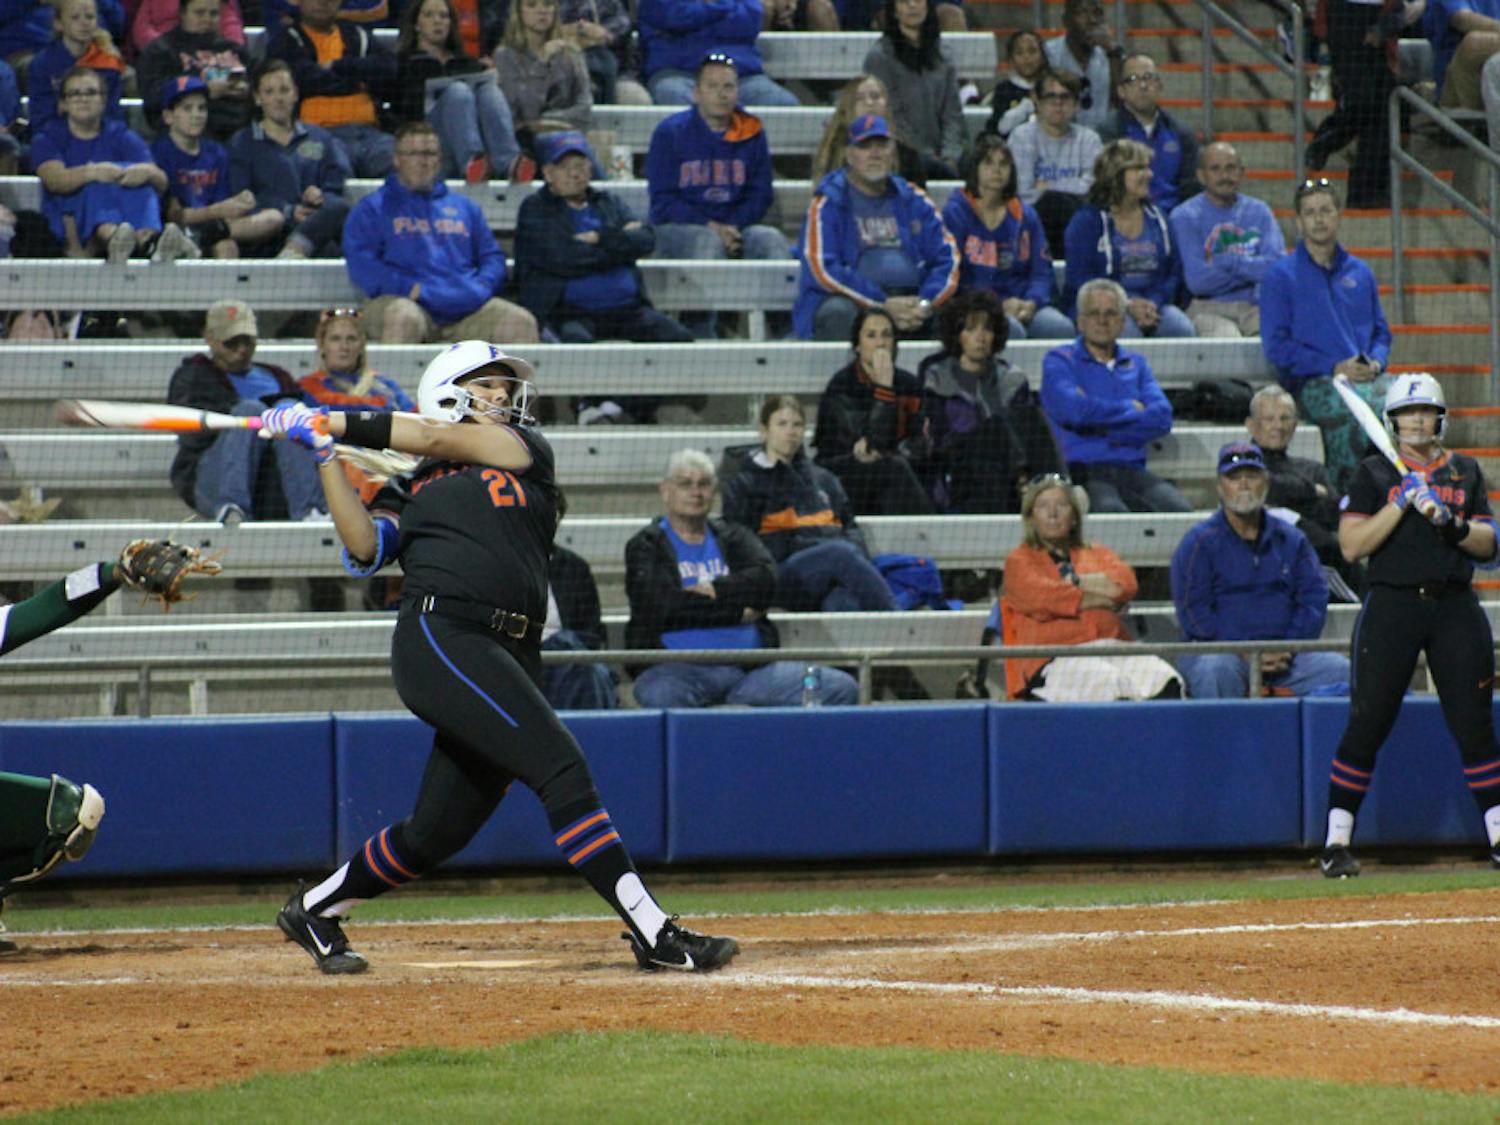 Kayli Kvistad hit a home run against Missouri that would give Florida the lead for good.